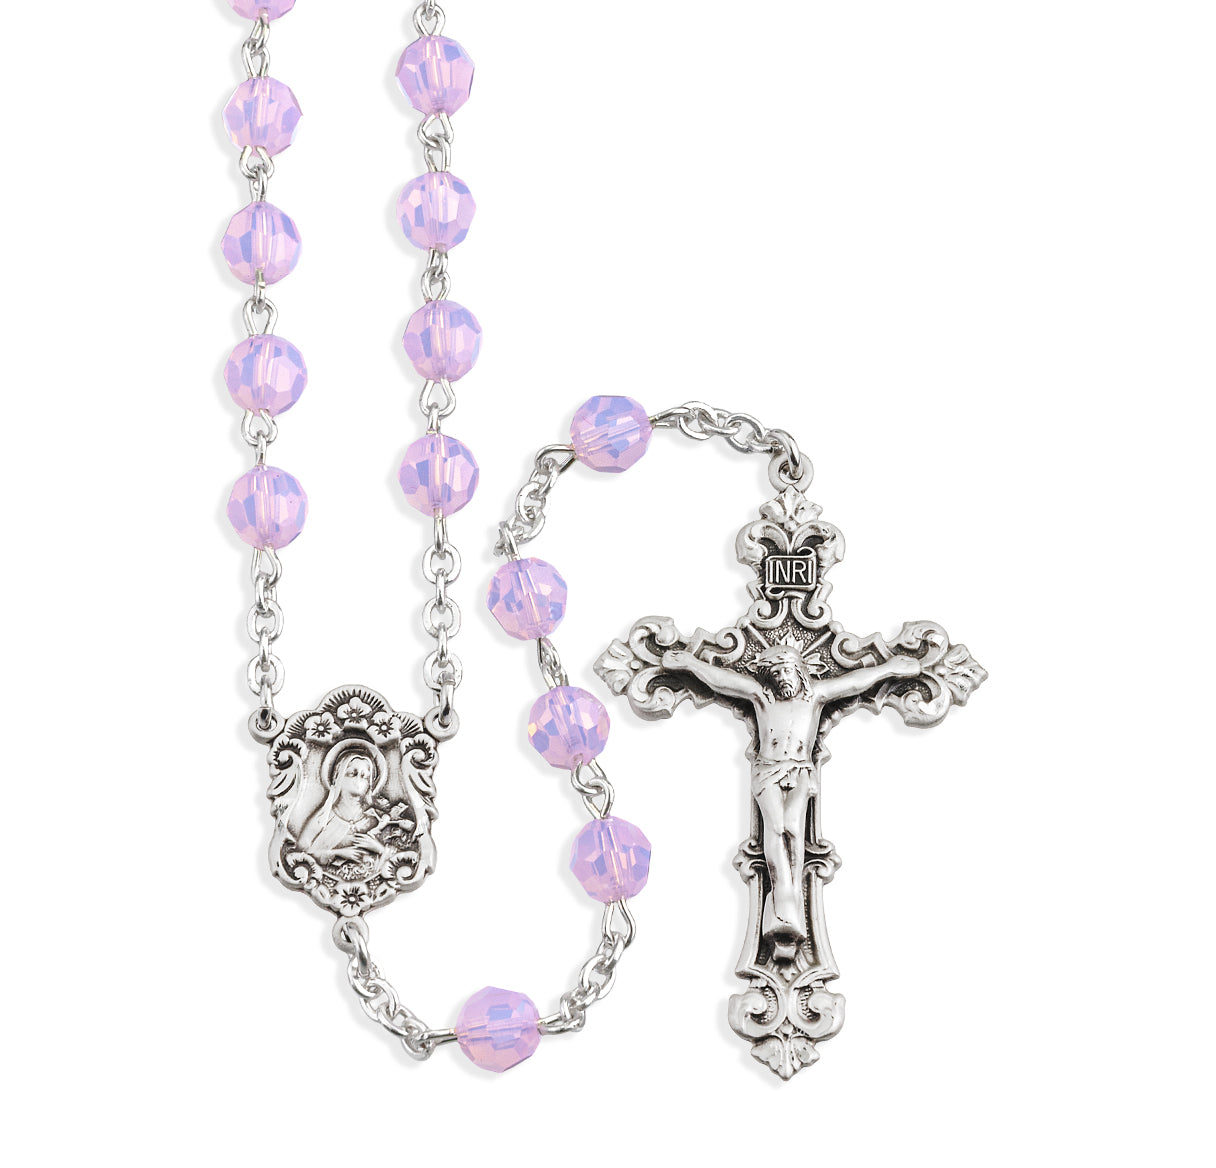 Rosary Sterling Crucifix and Centerpiece Created with Swarovski Crystal 6mm Faceted Round Rose Opal Beads by HMH